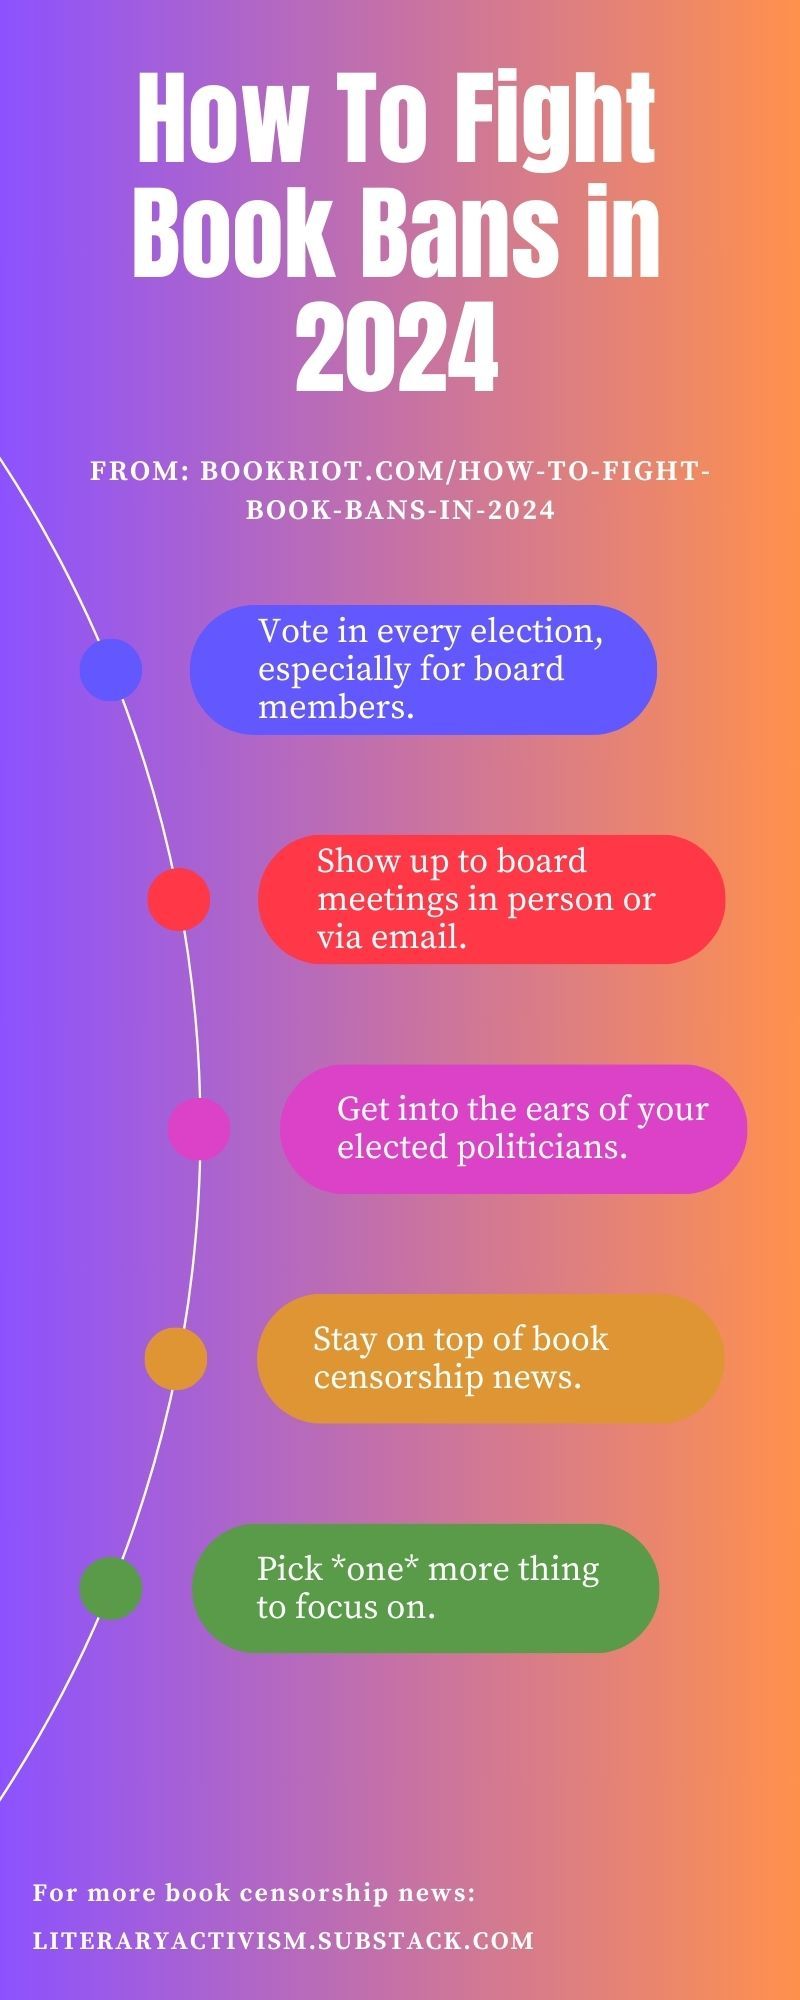 Infographic titled "how to fight book bans in 2024" that includes bullet points of the five tips for fighting book bans listed in the article. The image is on a purple and orange background. 